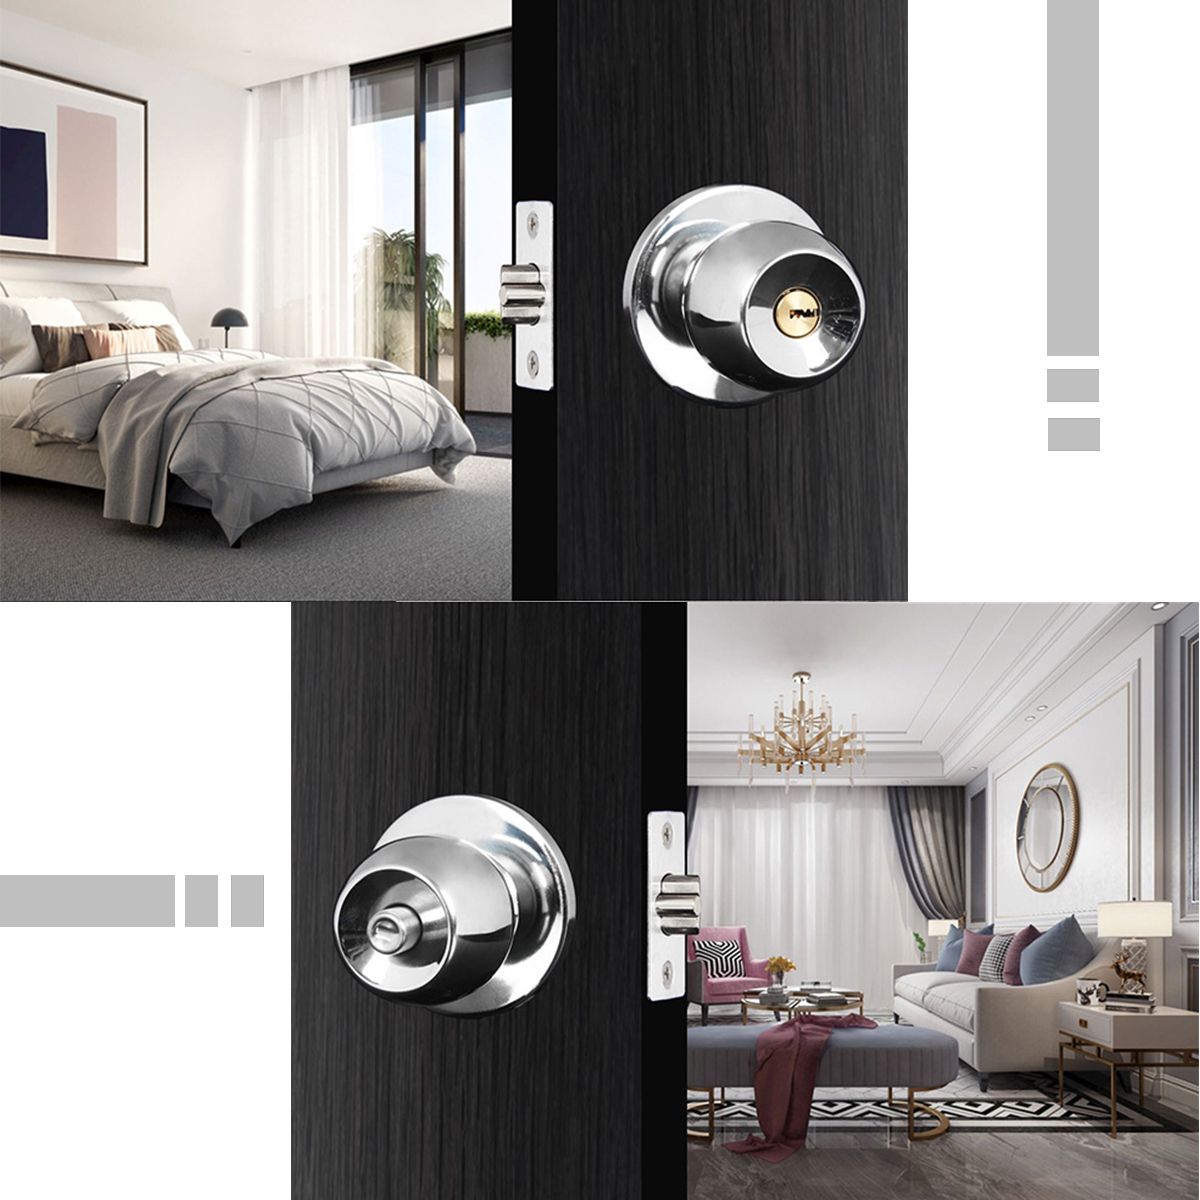 Stainless-Steel-Round-Door-Knobs-Privacy-Passage-Entrance-Lock-Entry-with-3-Keys-1680554